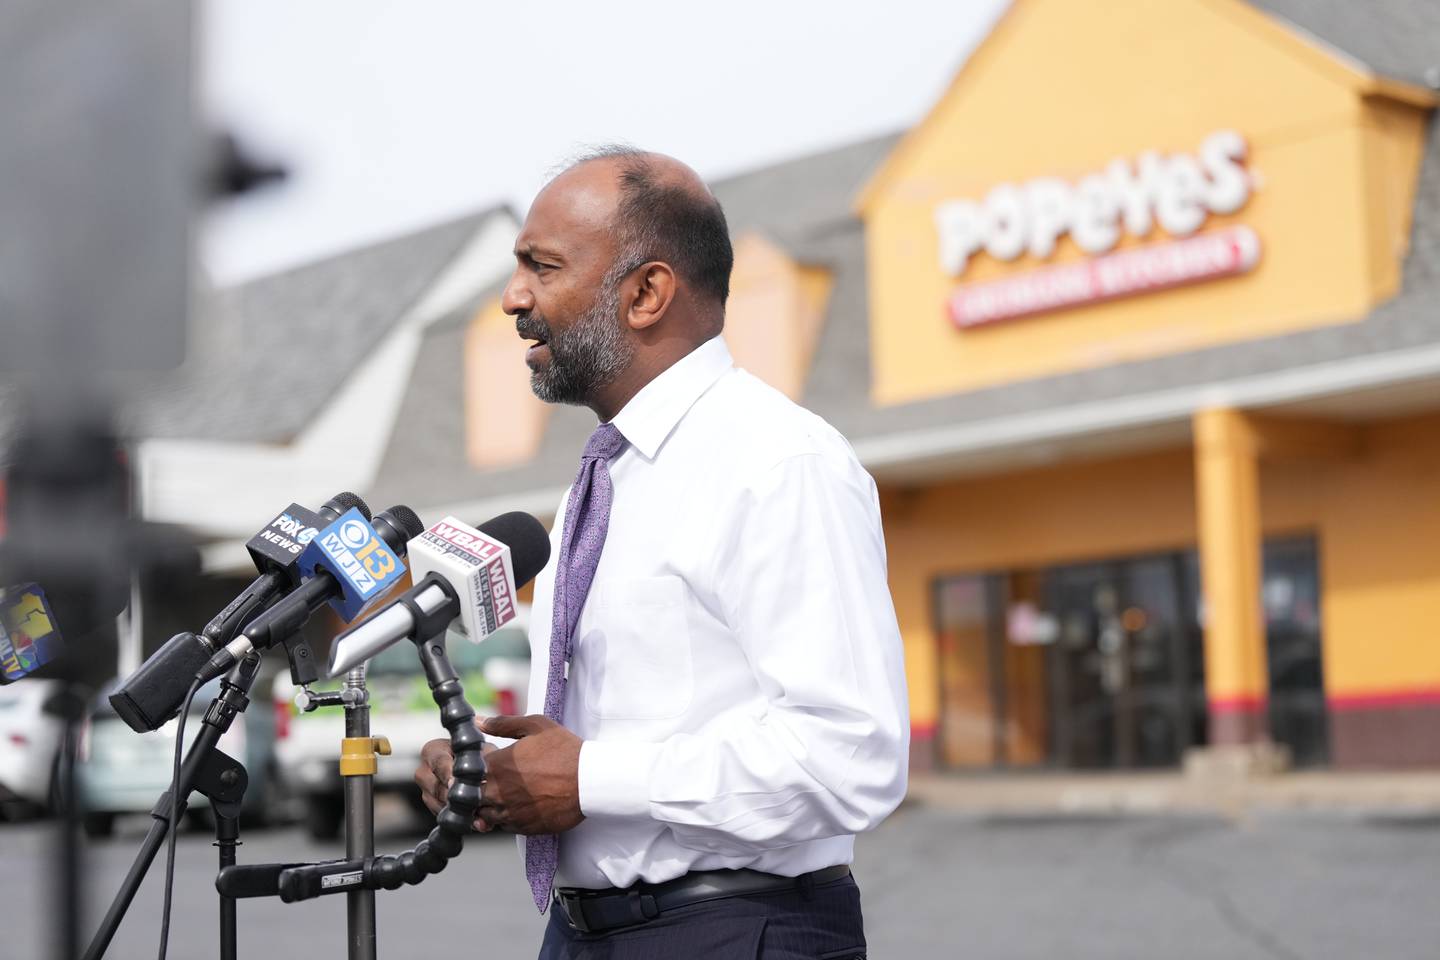 Attorney Thiru Vignarajah speaks at a press conference on Feb. 20 at Edmondson Village Shopping Center after the family of slain teen Deanta Dorsey was targeted in a shooting.